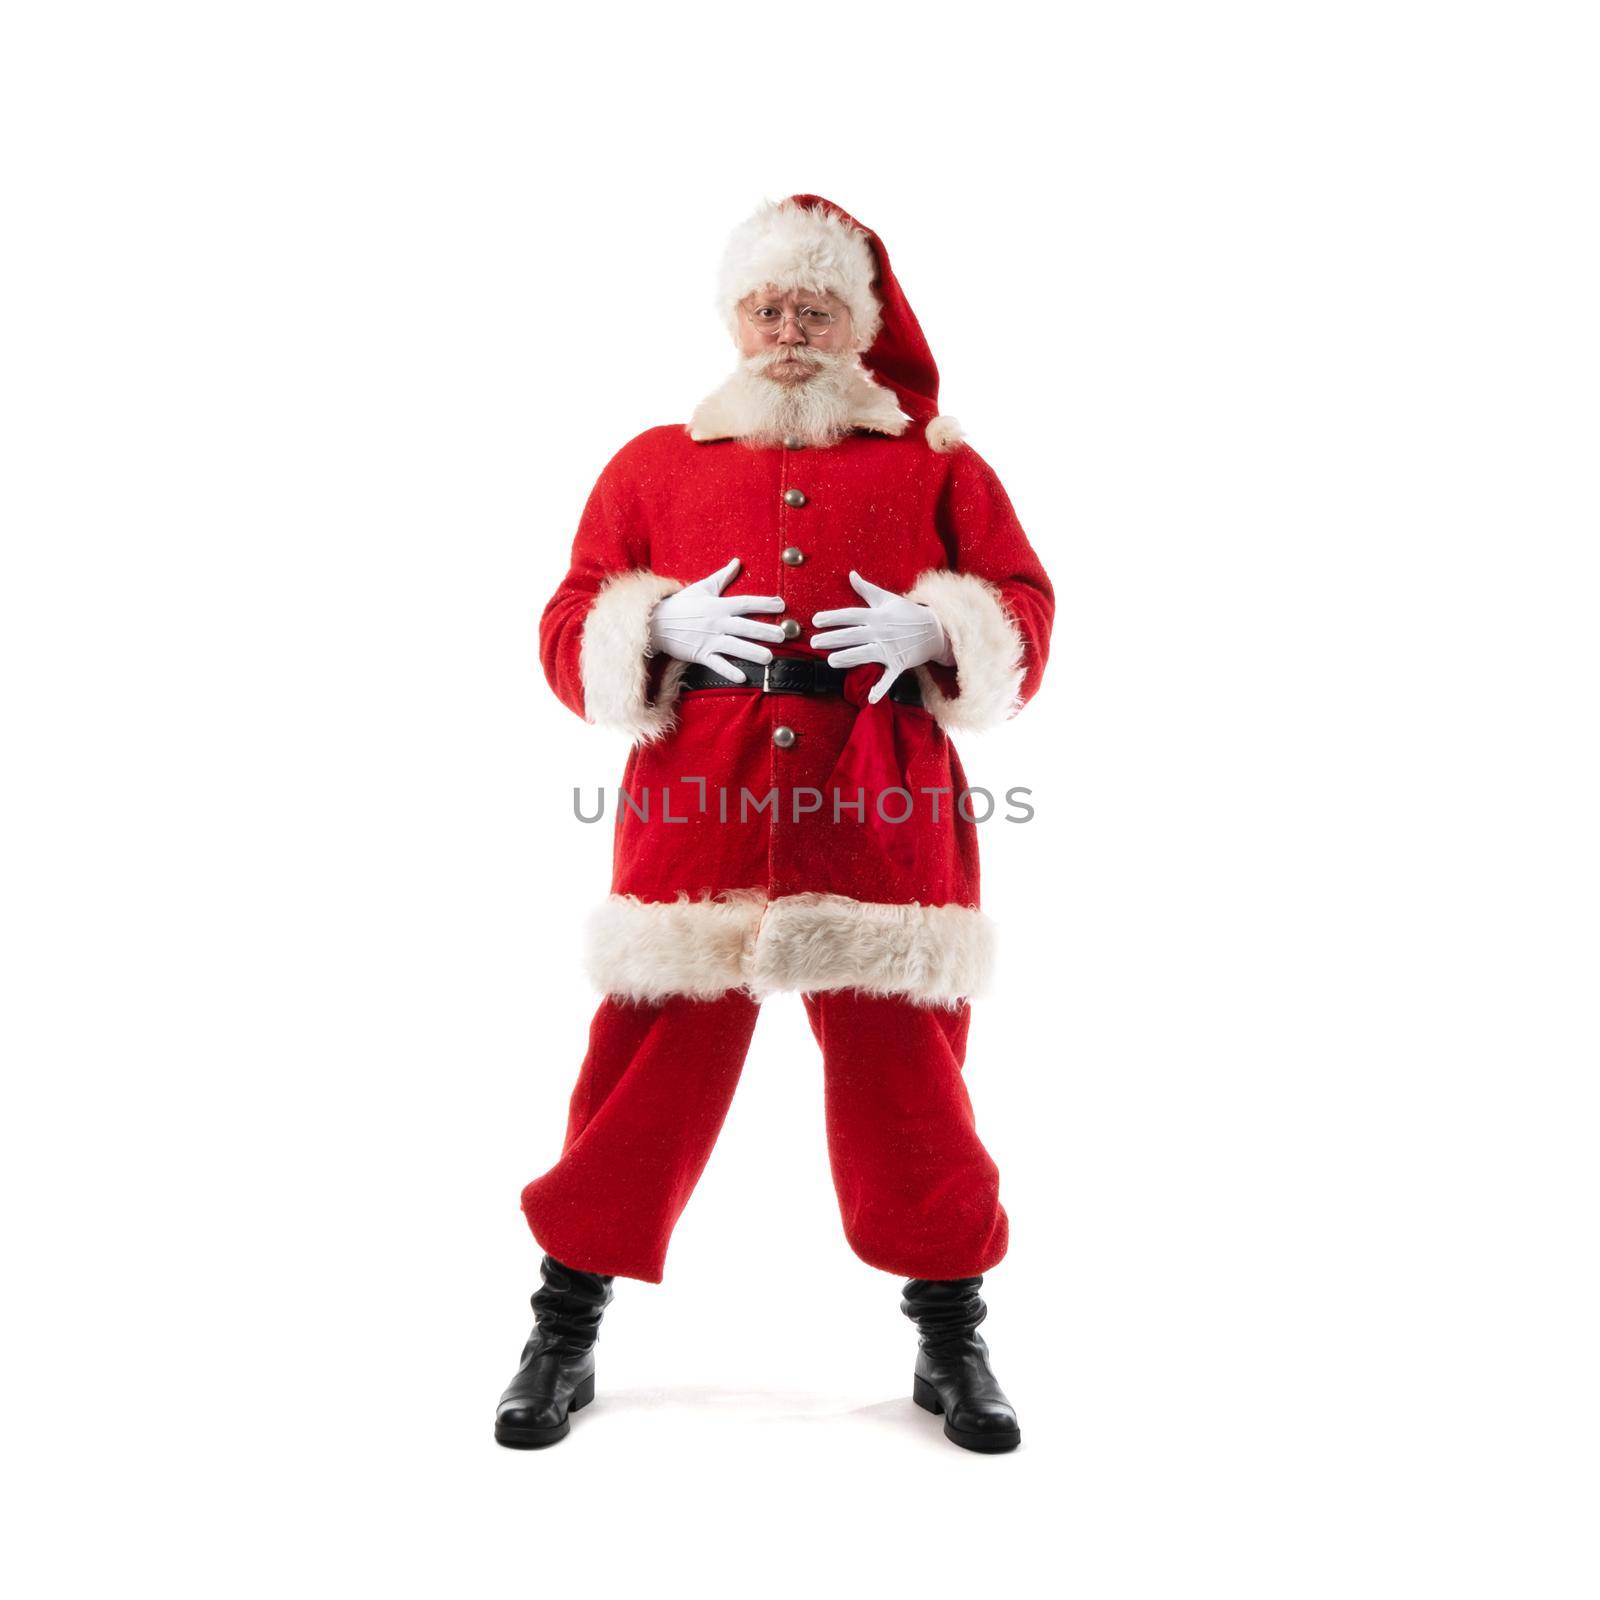 Santa Claus with hands on belly holding his hands on belt, isolated on white background.